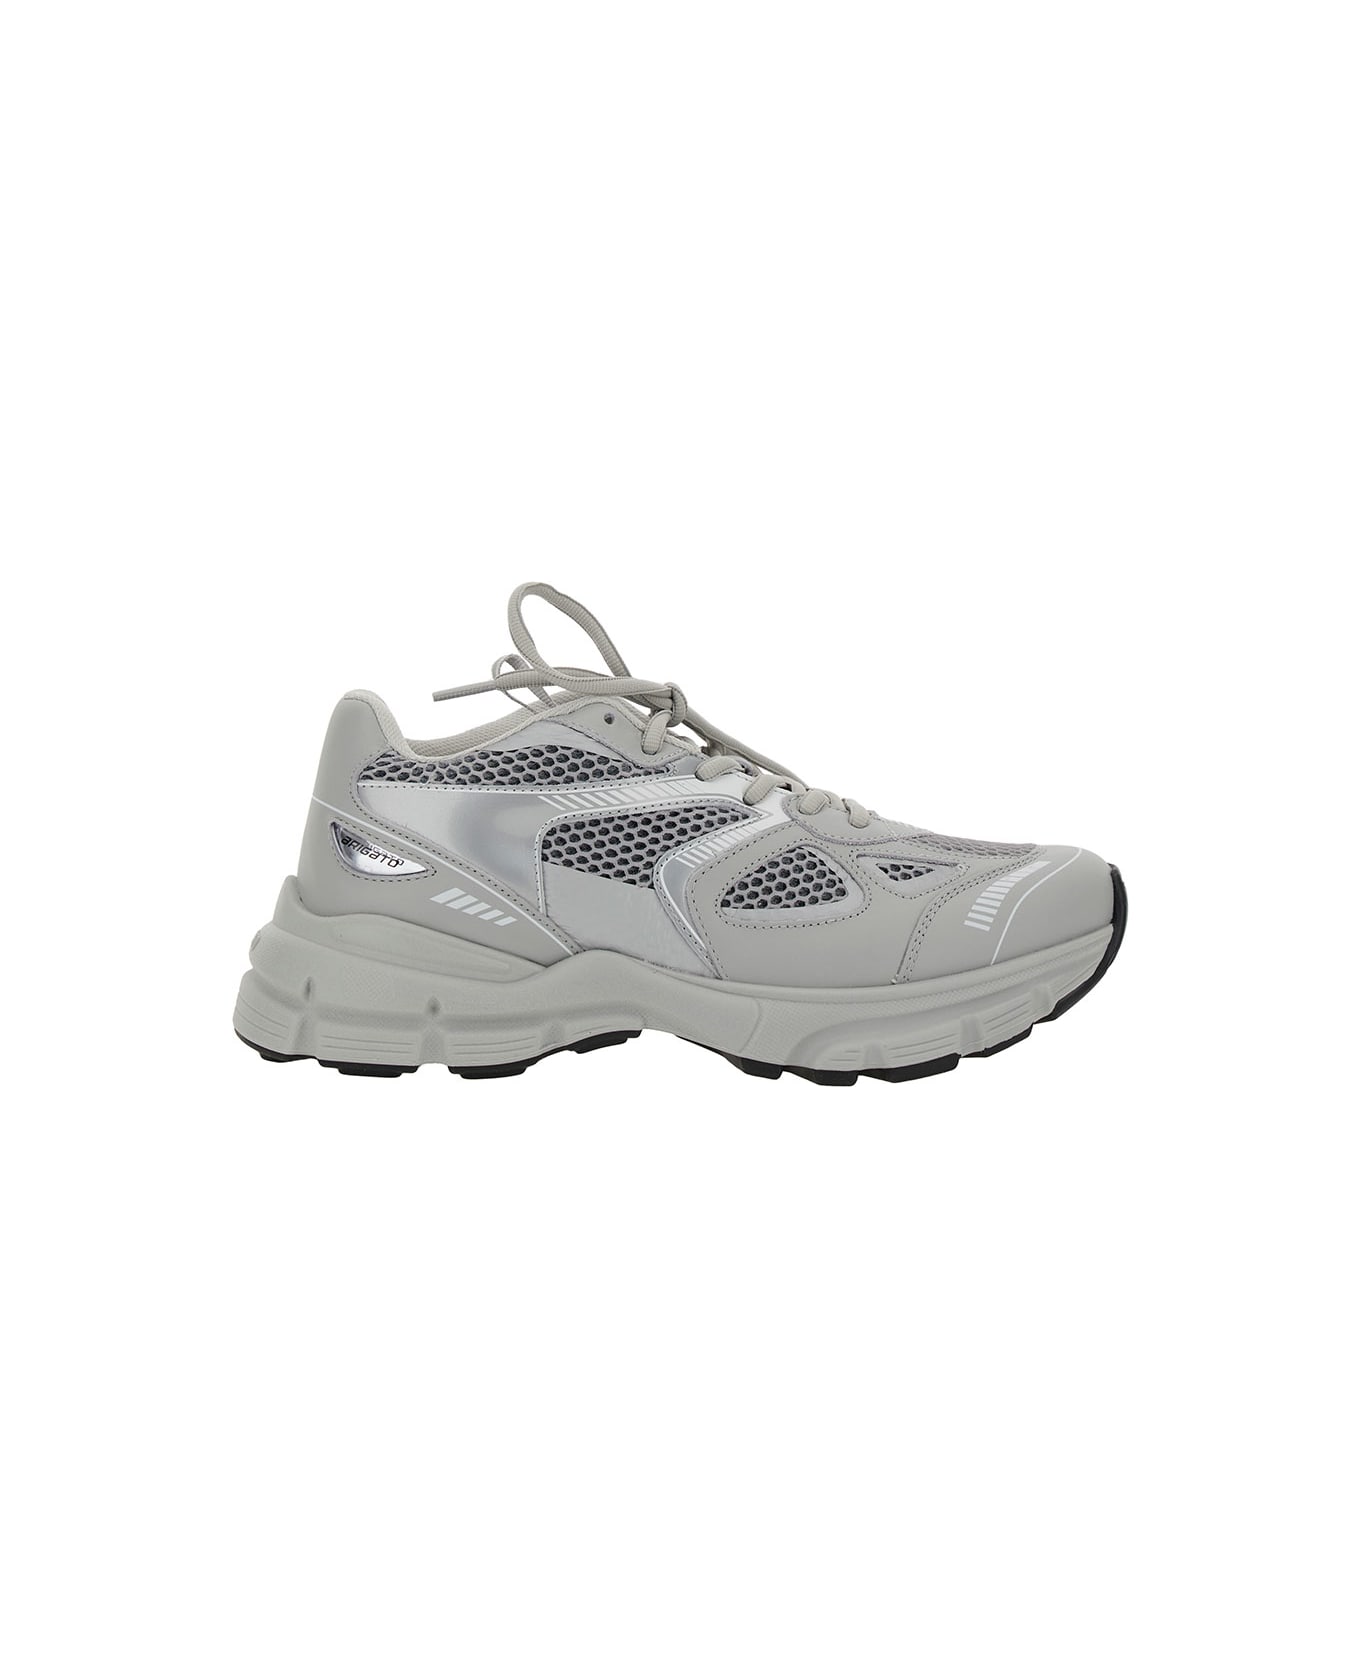 Axel Arigato 'marathon Runner' Grey Low Top Sneakers With Reflective Details In Leather Blend Woman - Grey スニーカー